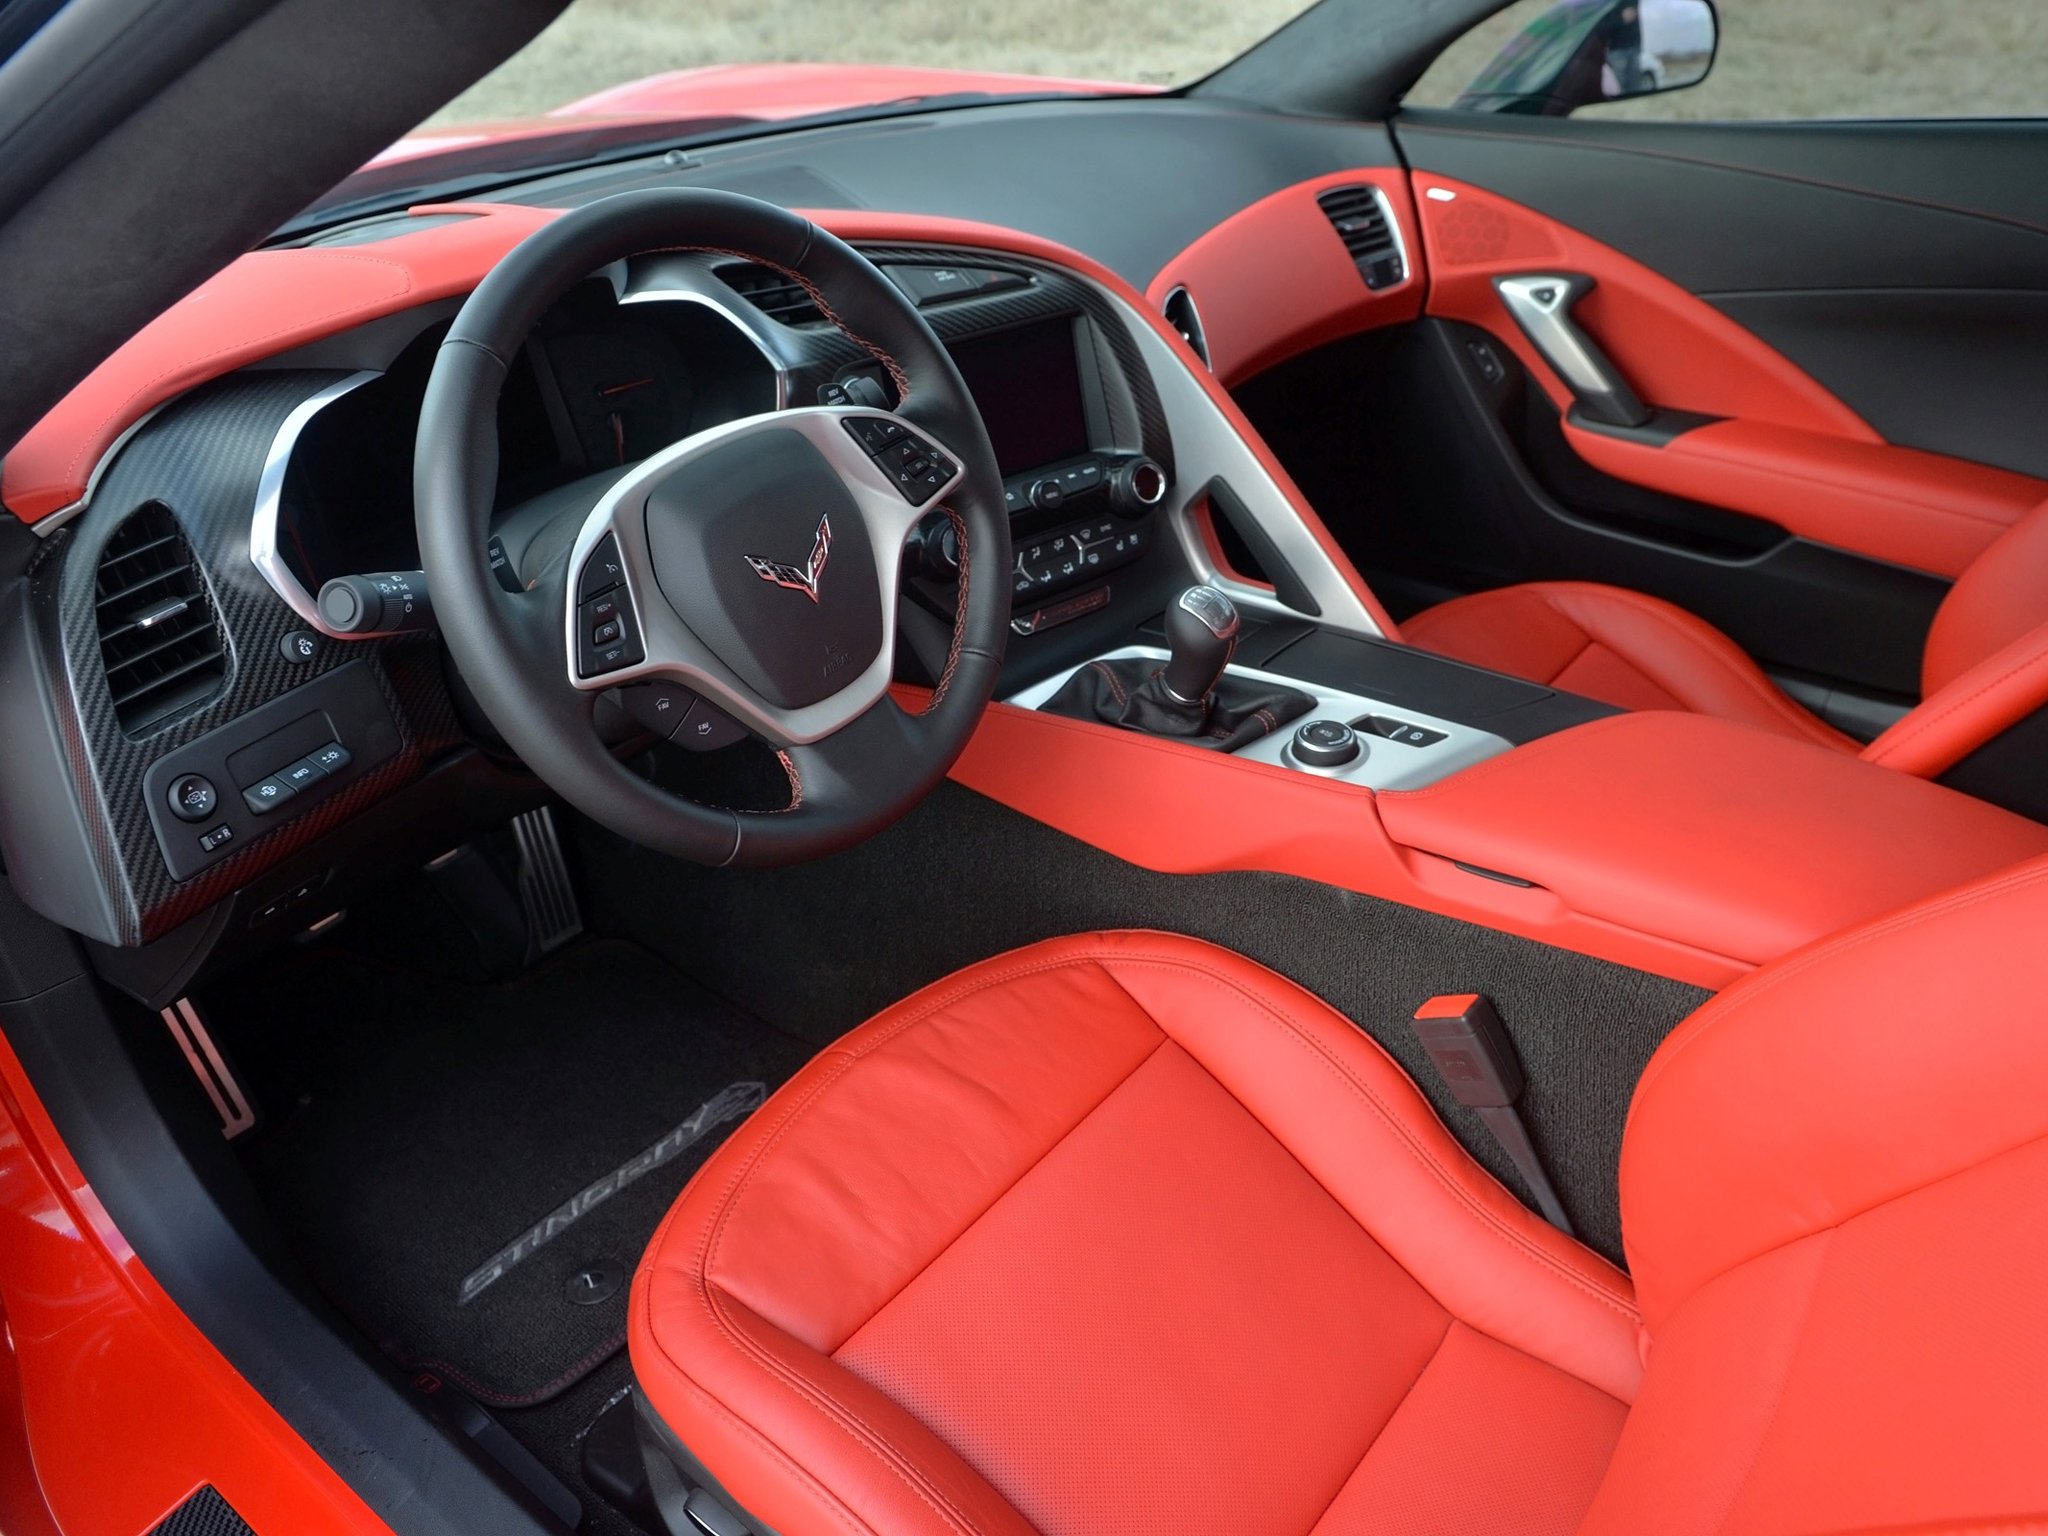 2014, Hennessey, Chevrolet, Corvette, Stingray, Hpe700, Twin, Turbo, C 7, Supercar, Muscle, Sting, Ray, Interior Wallpaper